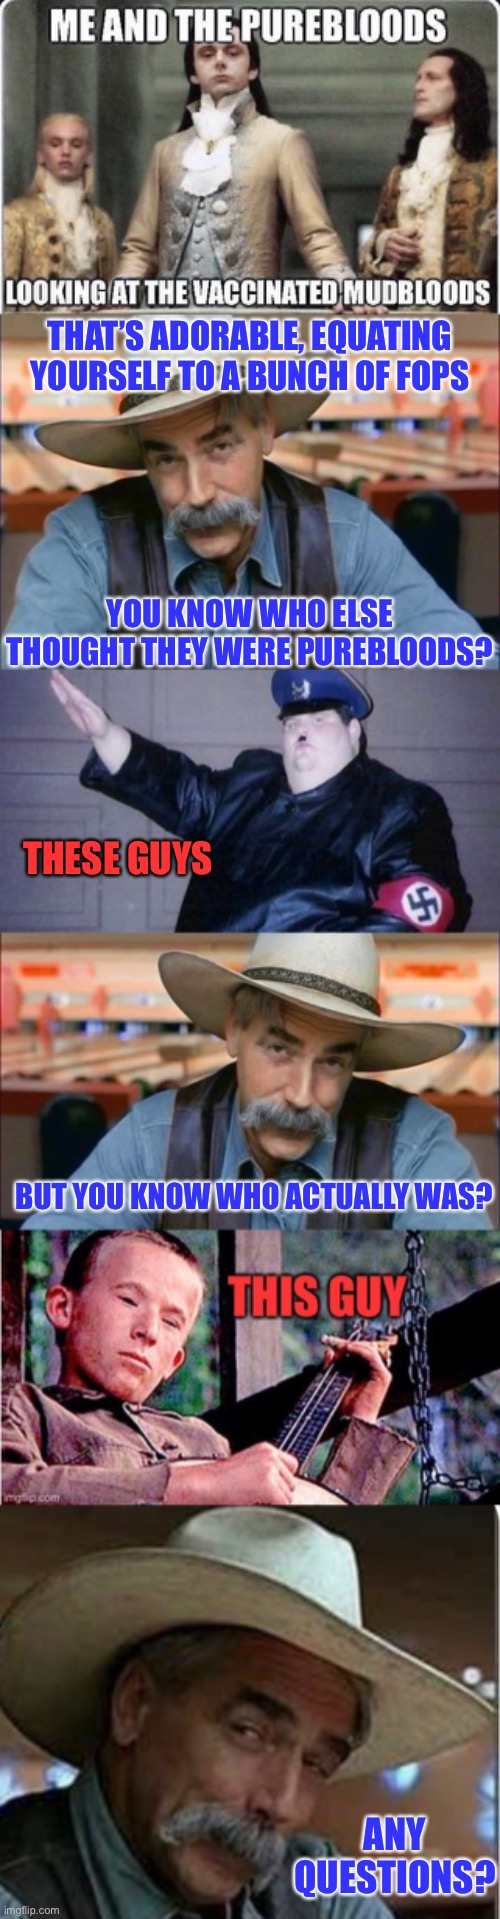 THAT’S ADORABLE, EQUATING YOURSELF TO A BUNCH OF FOPS; YOU KNOW WHO ELSE THOUGHT THEY WERE PUREBLOODS? THESE GUYS; BUT YOU KNOW WHO ACTUALLY WAS? ANY QUESTIONS? | image tagged in sam elliott special kind of stupid,fat nazi,covid-19,covid vaccine | made w/ Imgflip meme maker